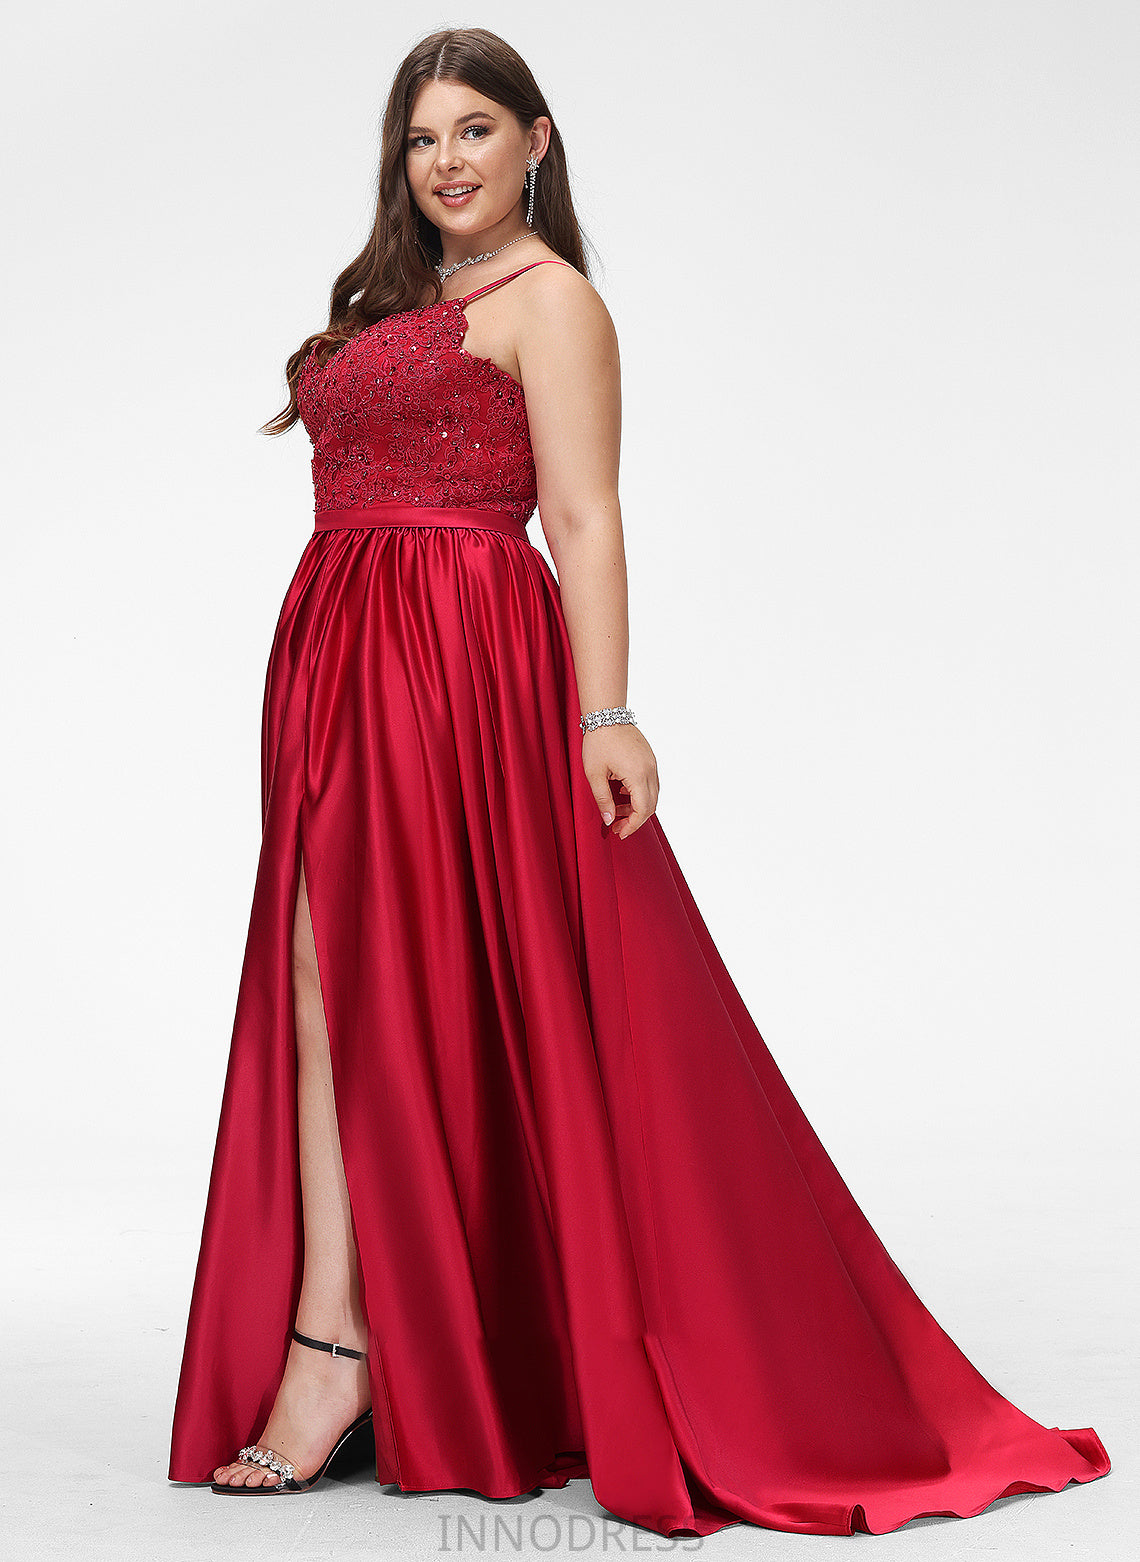 Split Train Prom Dresses Sweep Kadence V-neck Beading Sequins Ball-Gown/Princess Front Satin With